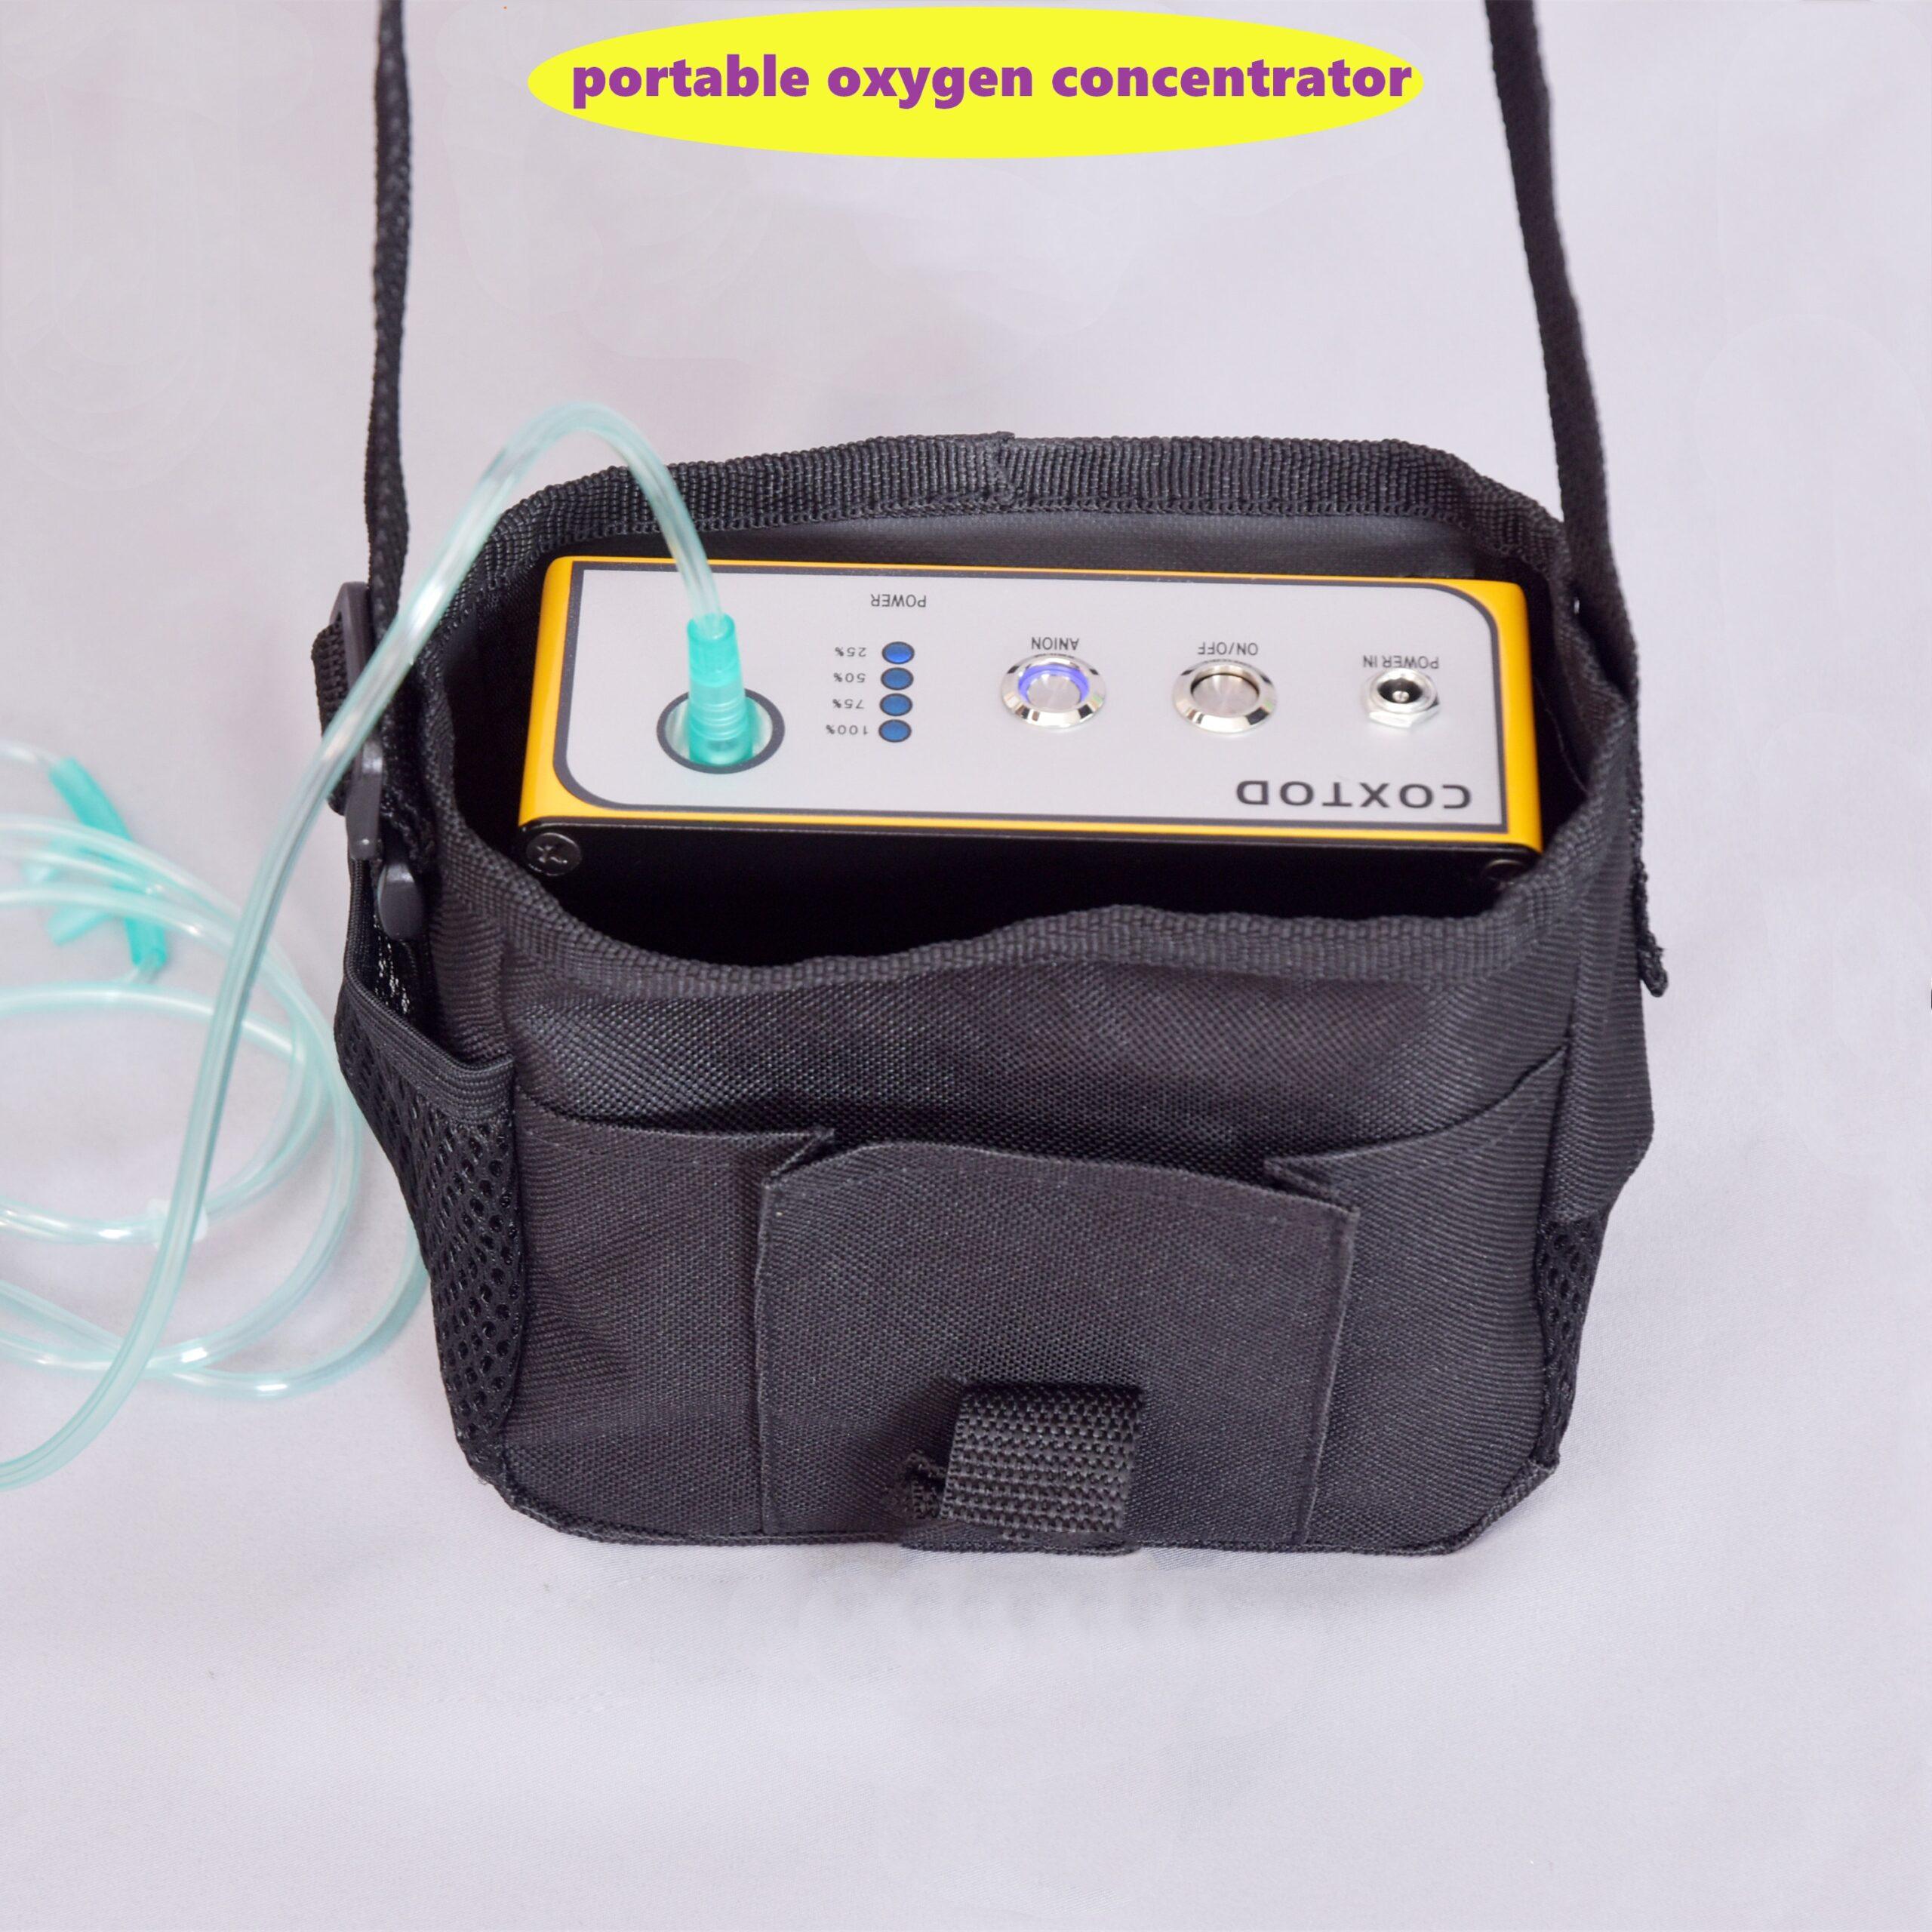 Hiking Oxygen Concentrator Camping use Oxygenerator Shopping Driving Oxygen Bar with 8 hours battery lasting Oxygen Machine